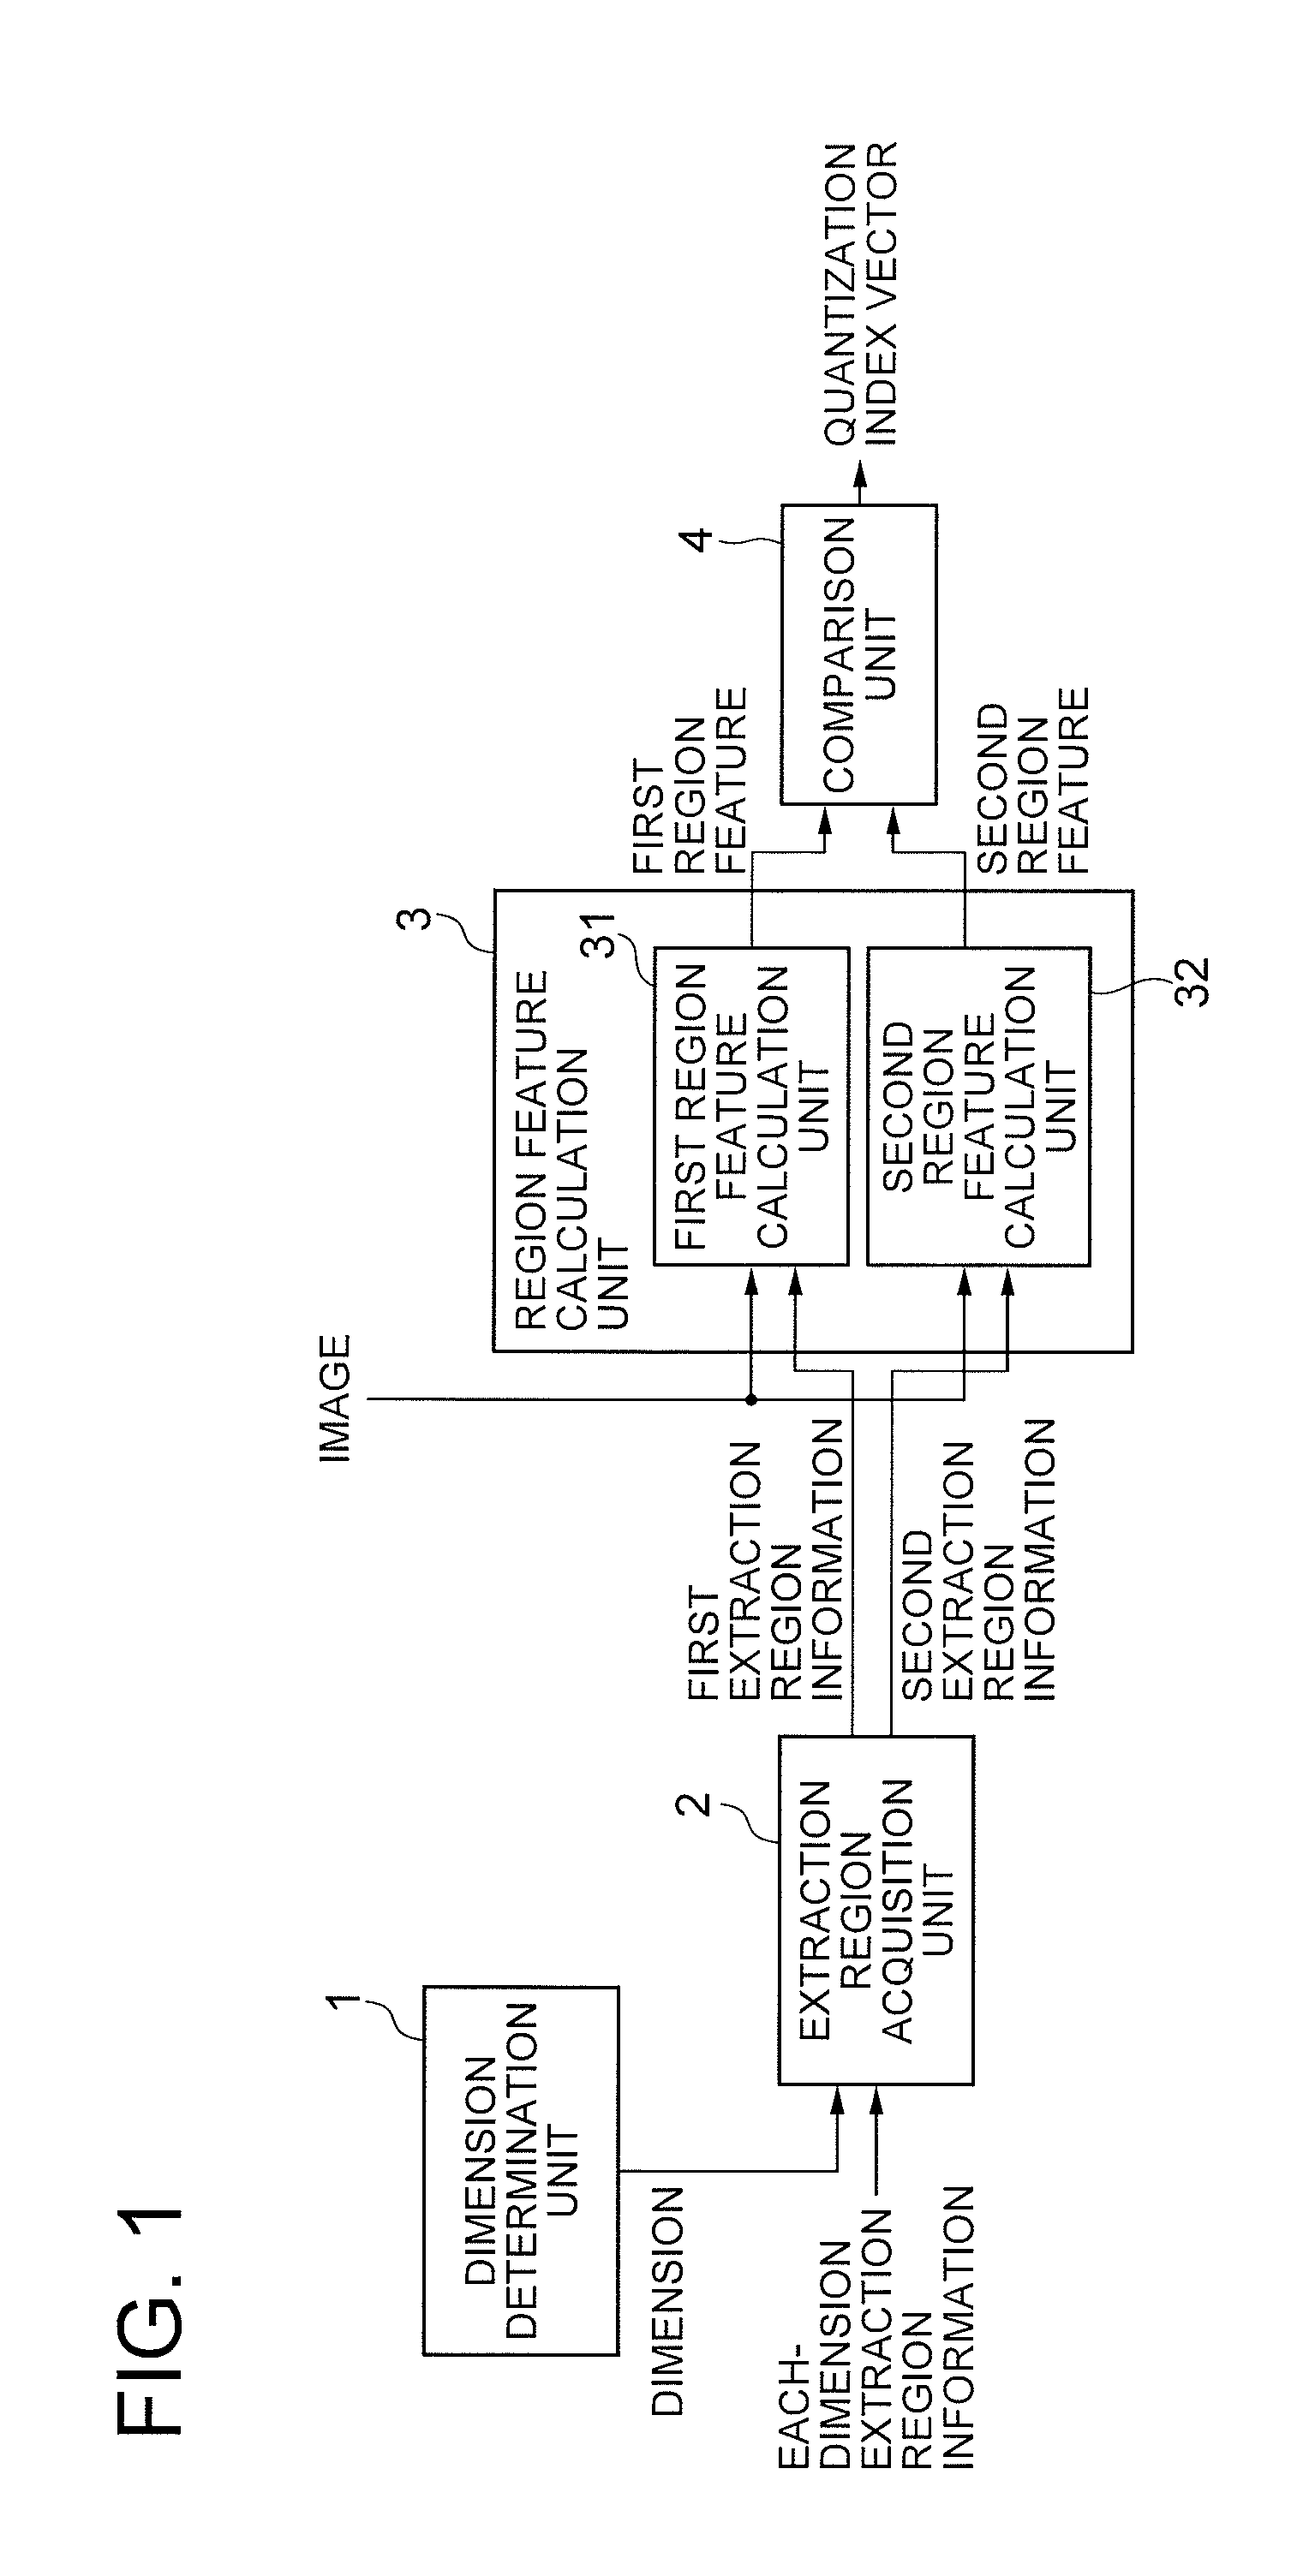 Image signature extraction device